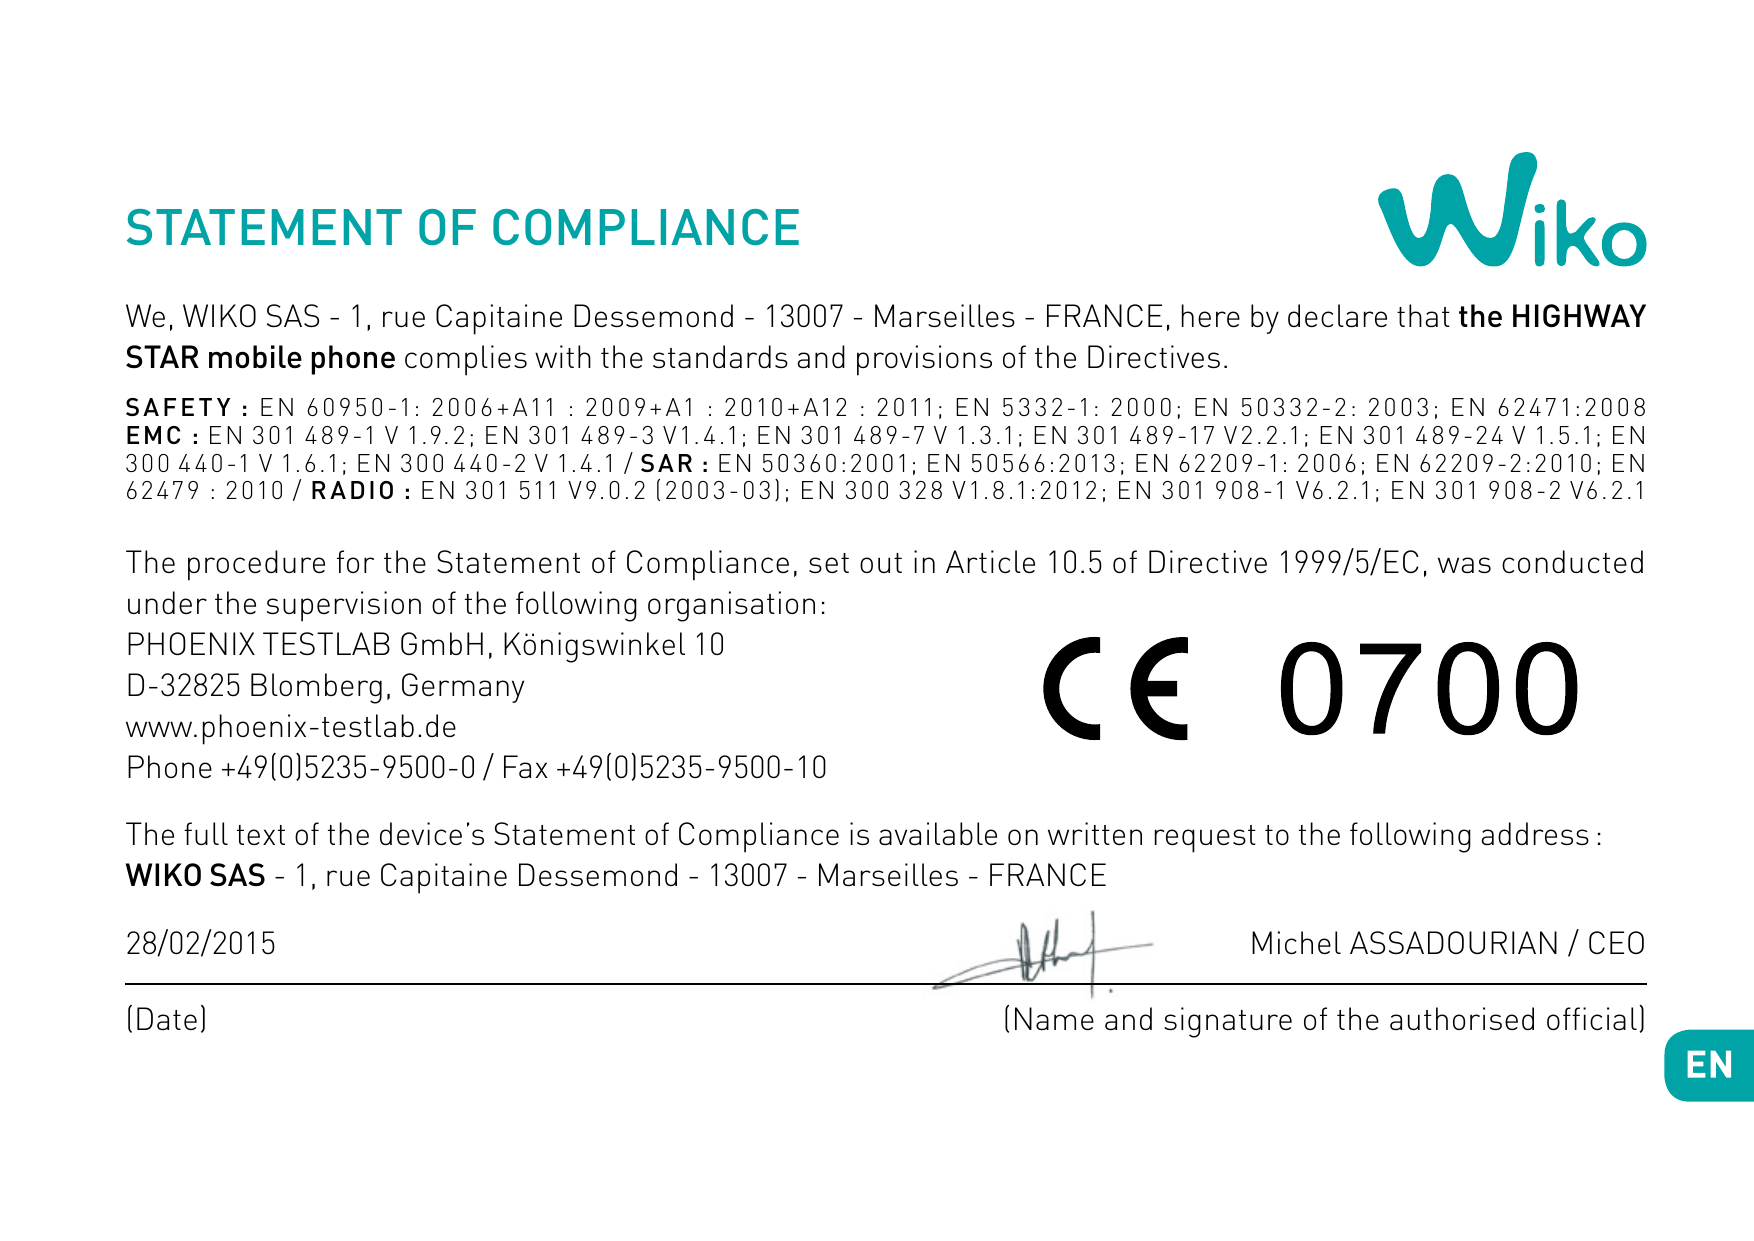 STATEMENT OF COMPLIANCEWe, WIKO SAS - 1, rue Capitaine Dessemond - 13007 - Marseilles - FRANCE, here by declare that the HIGHWAY